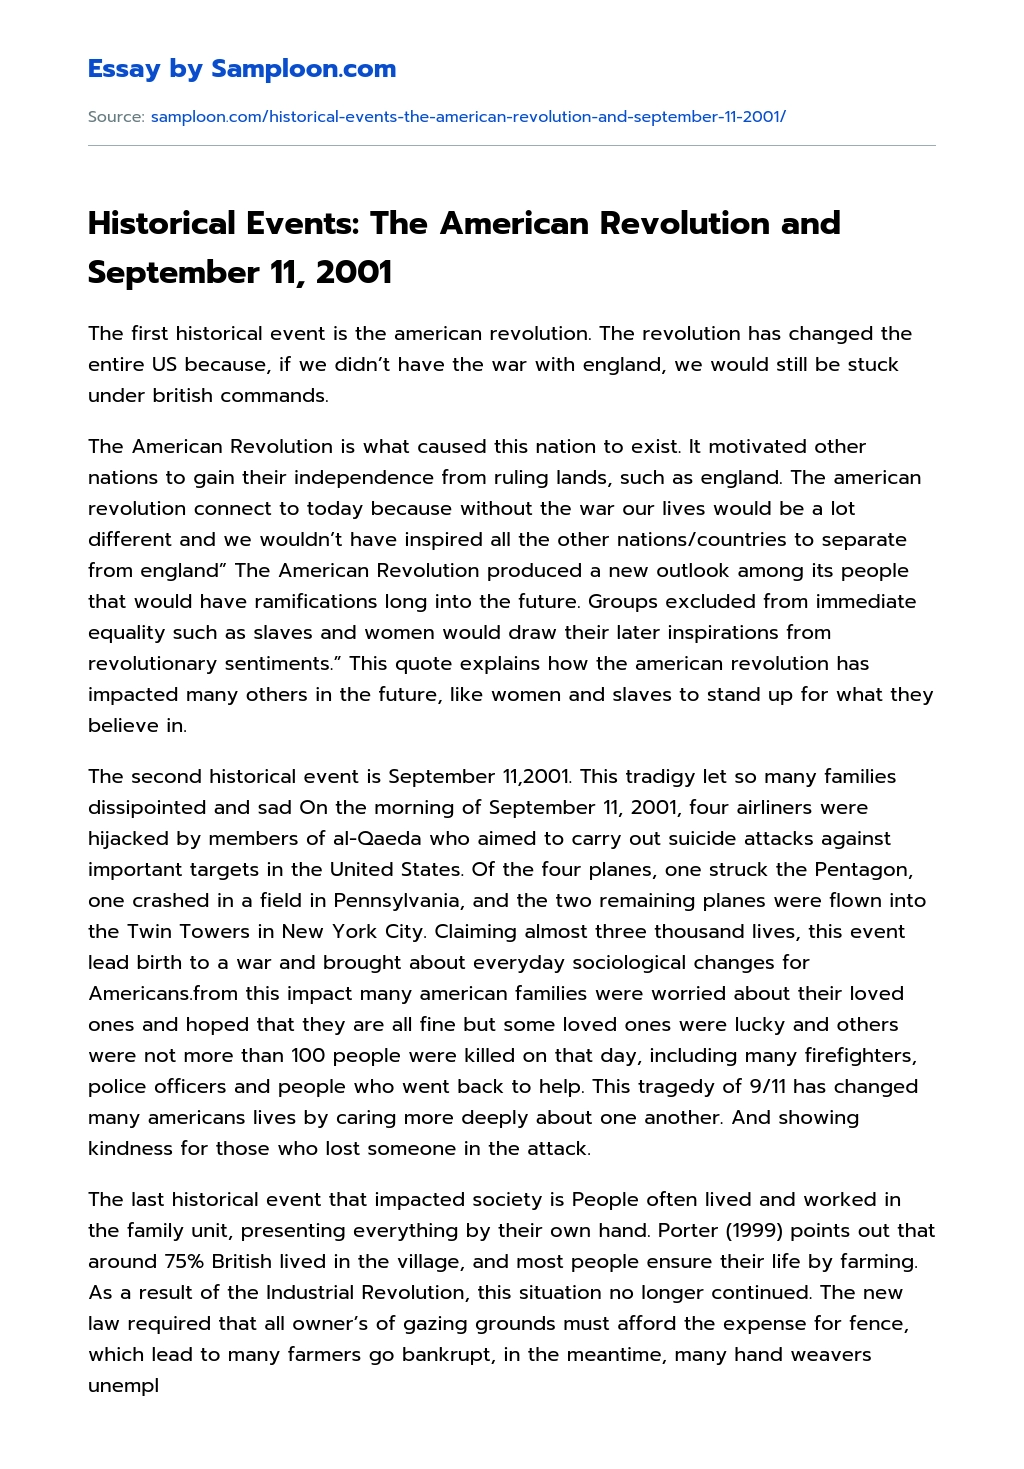 Historical Events: The American Revolution and September 11, 2001 Review essay